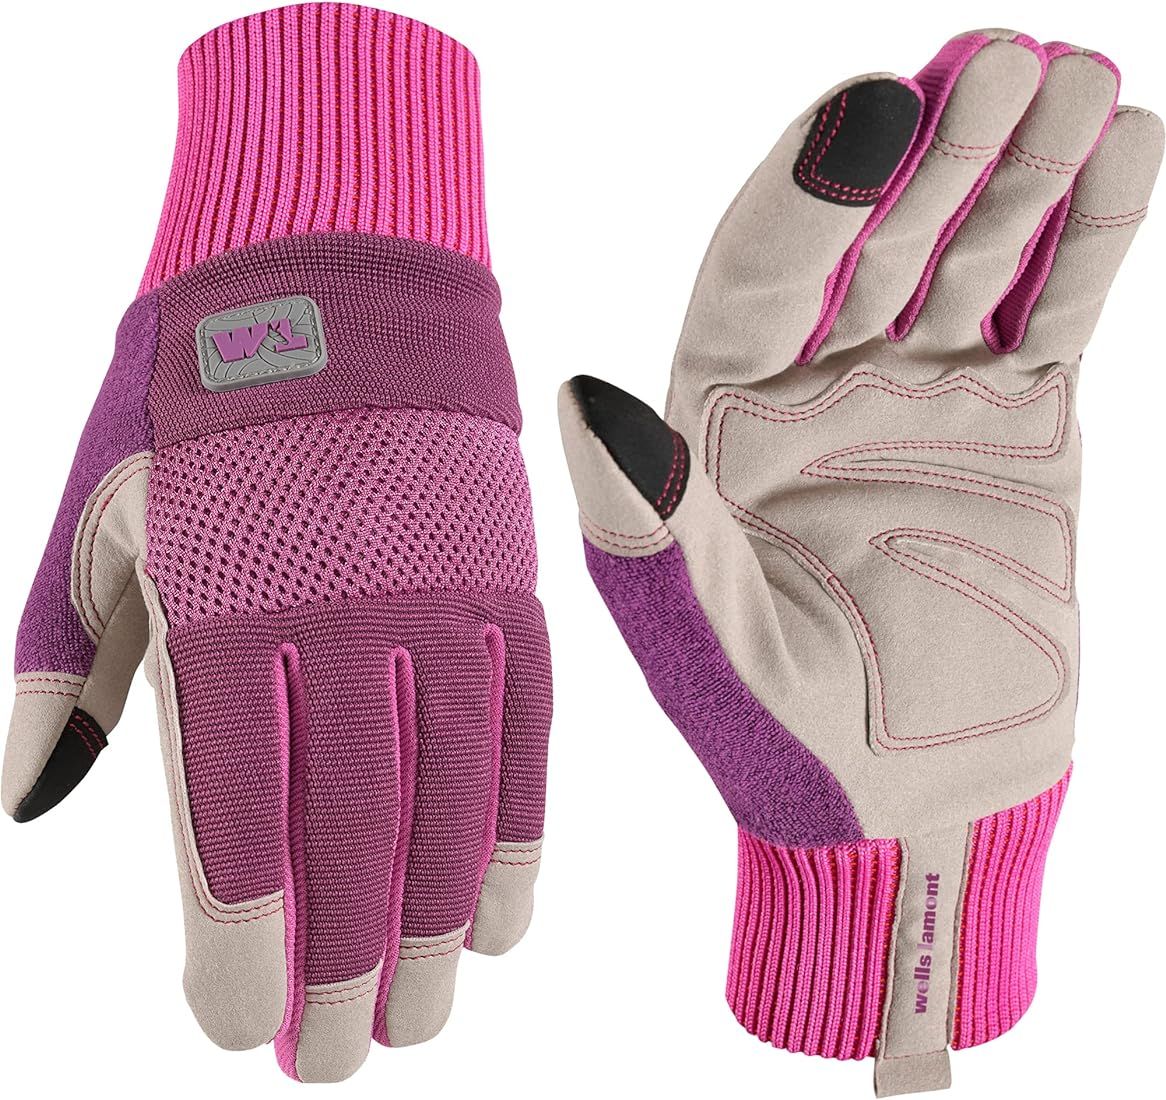 Wells Lamont Women's High Dexterity Breathable 3D Mesh Work and Gardening Gloves, Pink (7764) | Amazon (US)